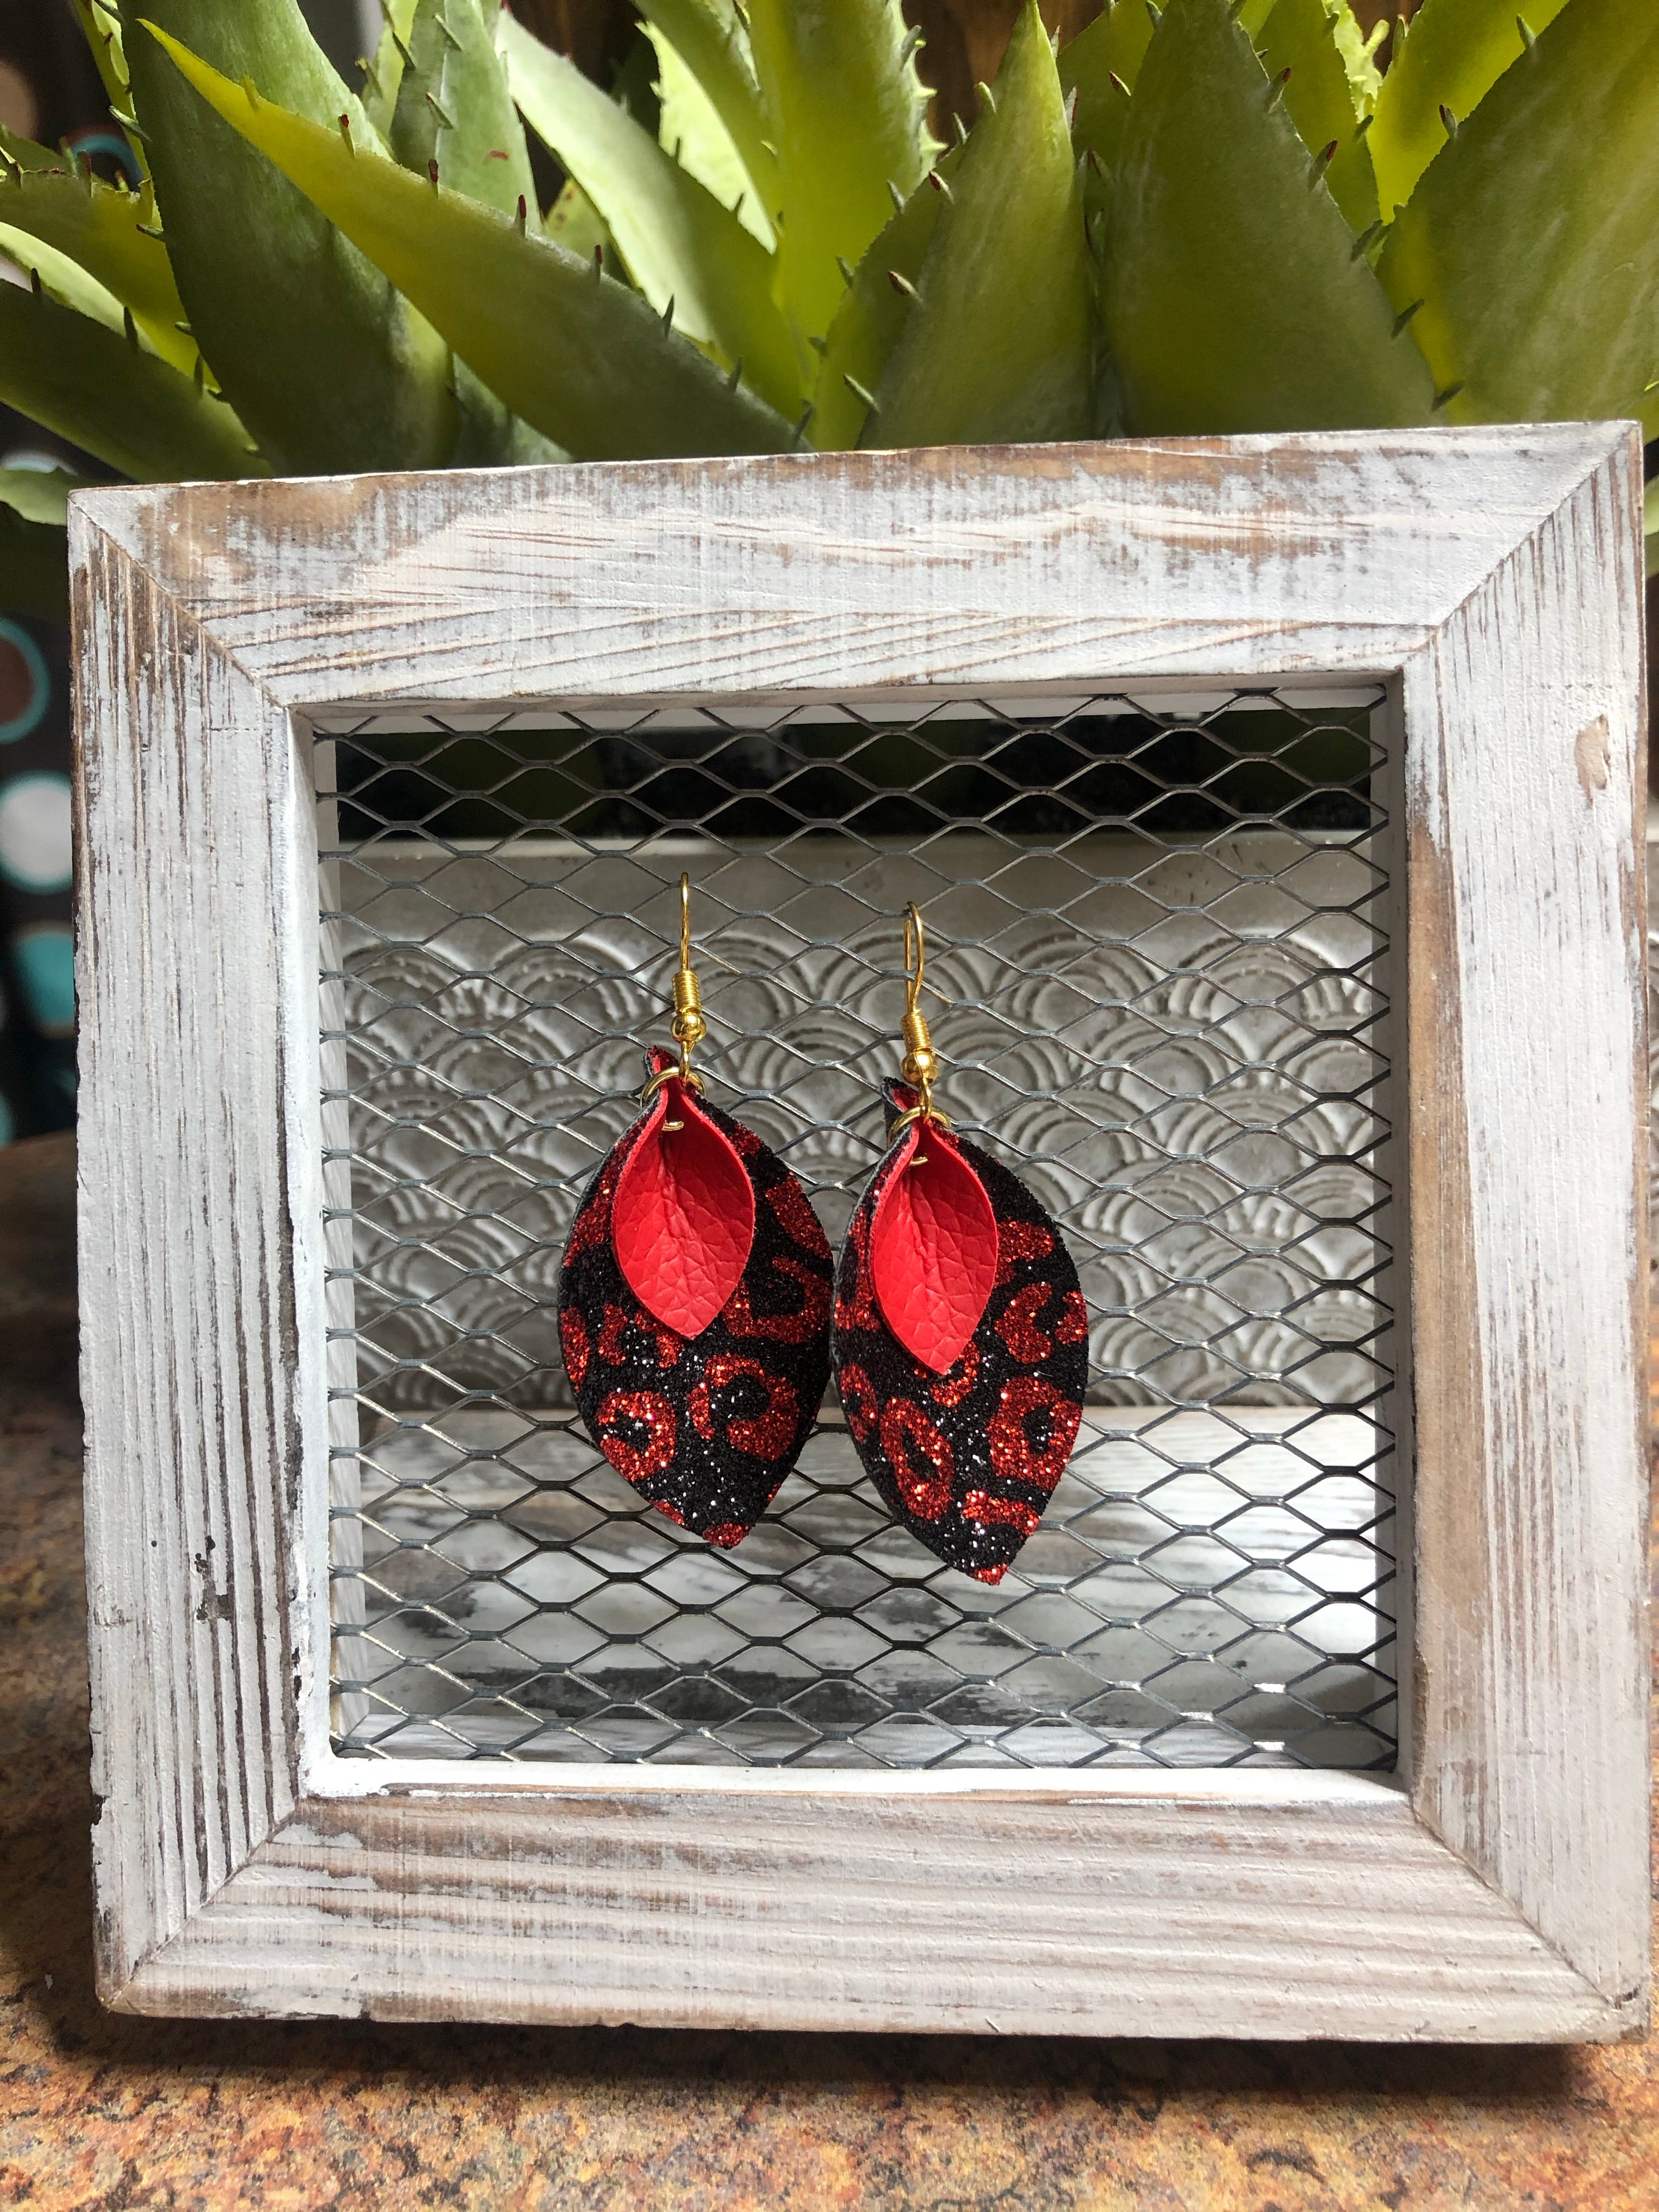 Sparkle Logo Brown Cheetah Print Up-cycle Earrings – Red Bison Home